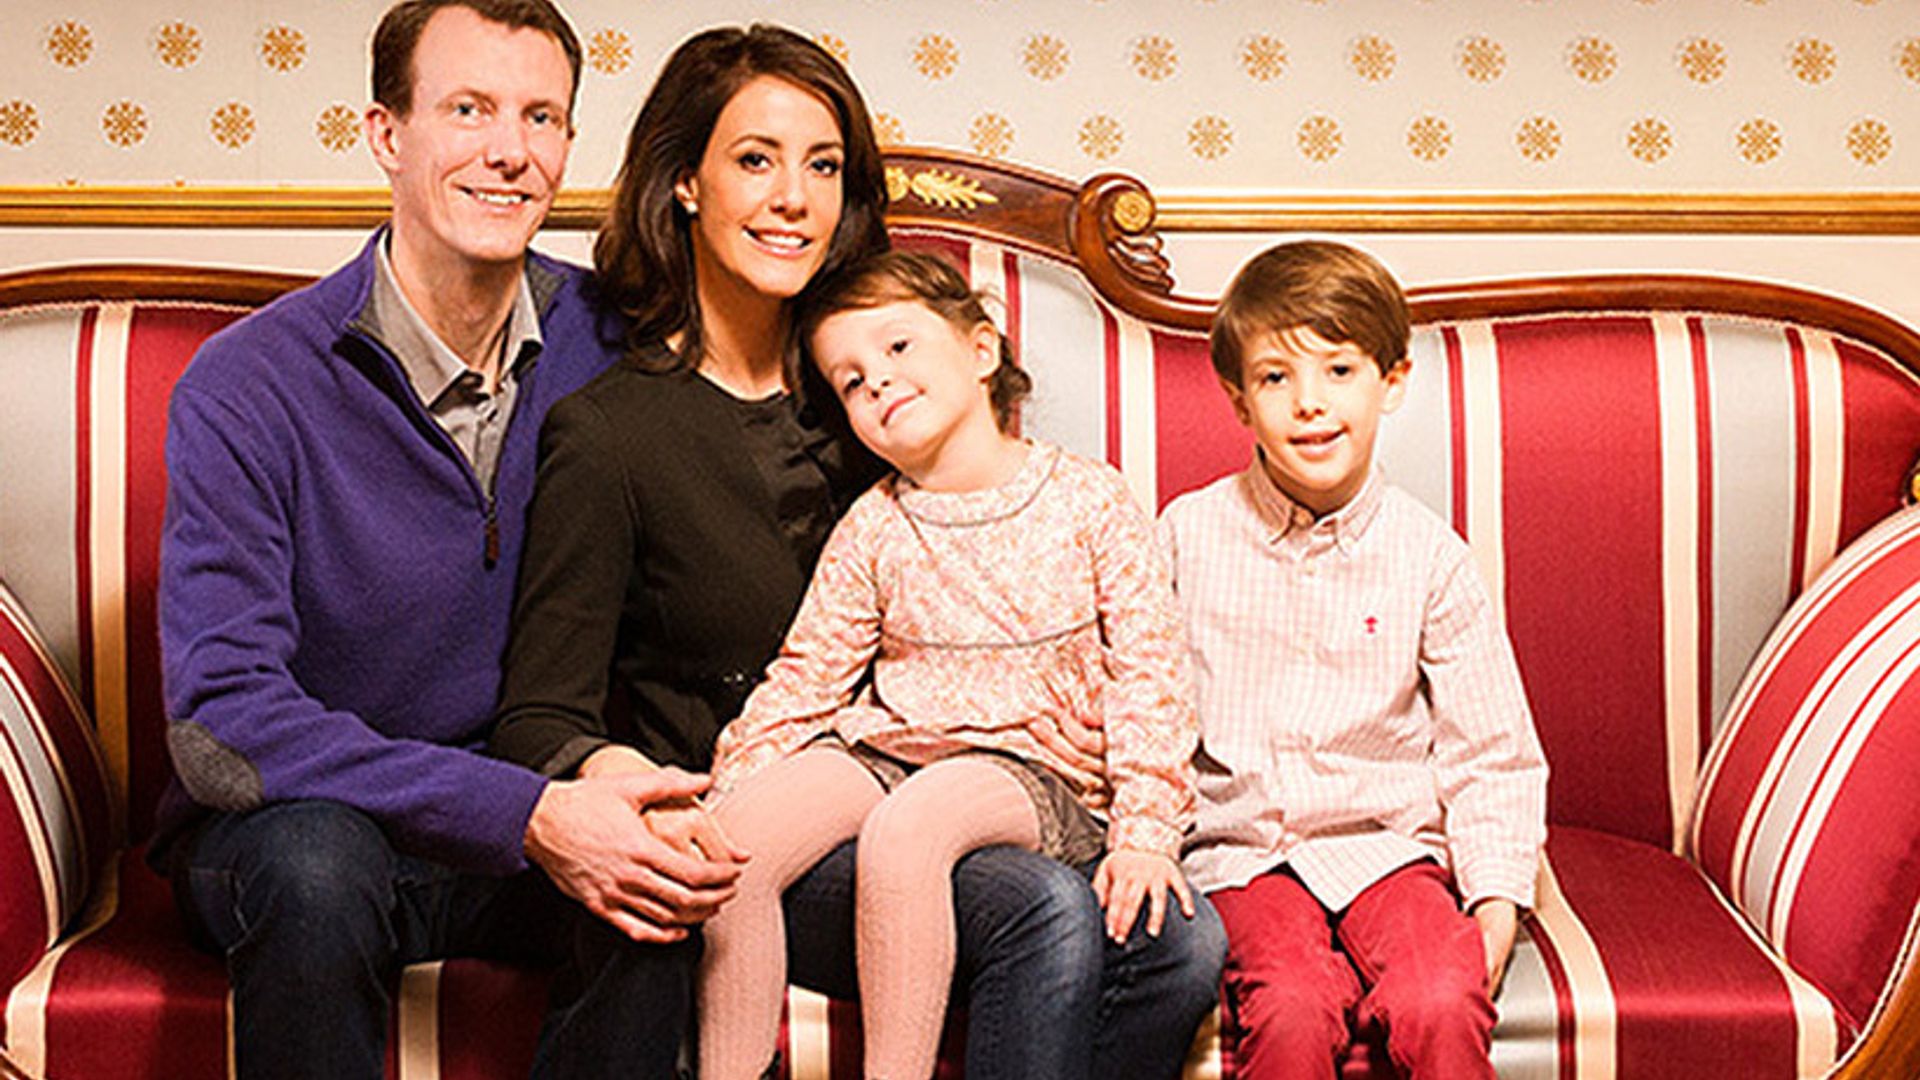 HELLO! photos of Denmark's Princess Marie and family feature on Danish palace website